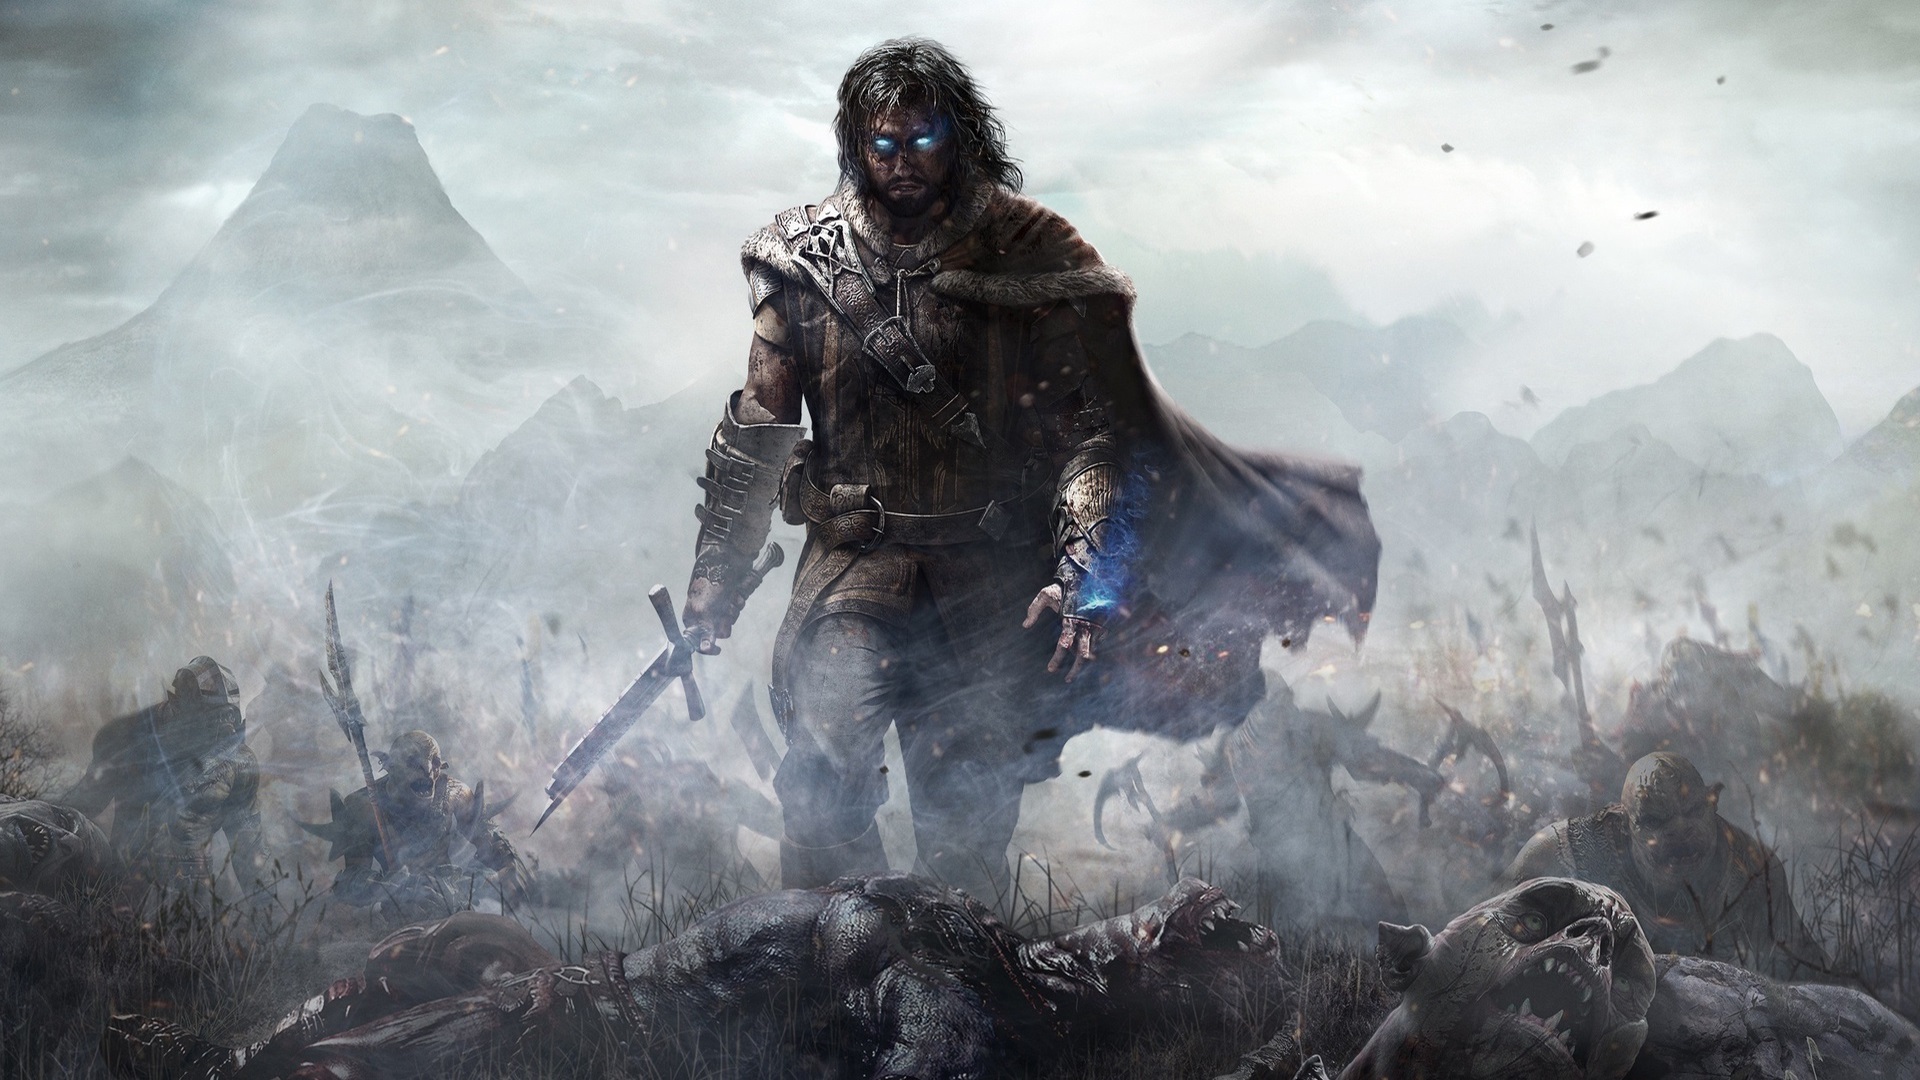 General 1920x1080 Middle-earth: Shadow of Mordor video games The Lord of the Rings artwork fantasy art Orc orcs men sword cape